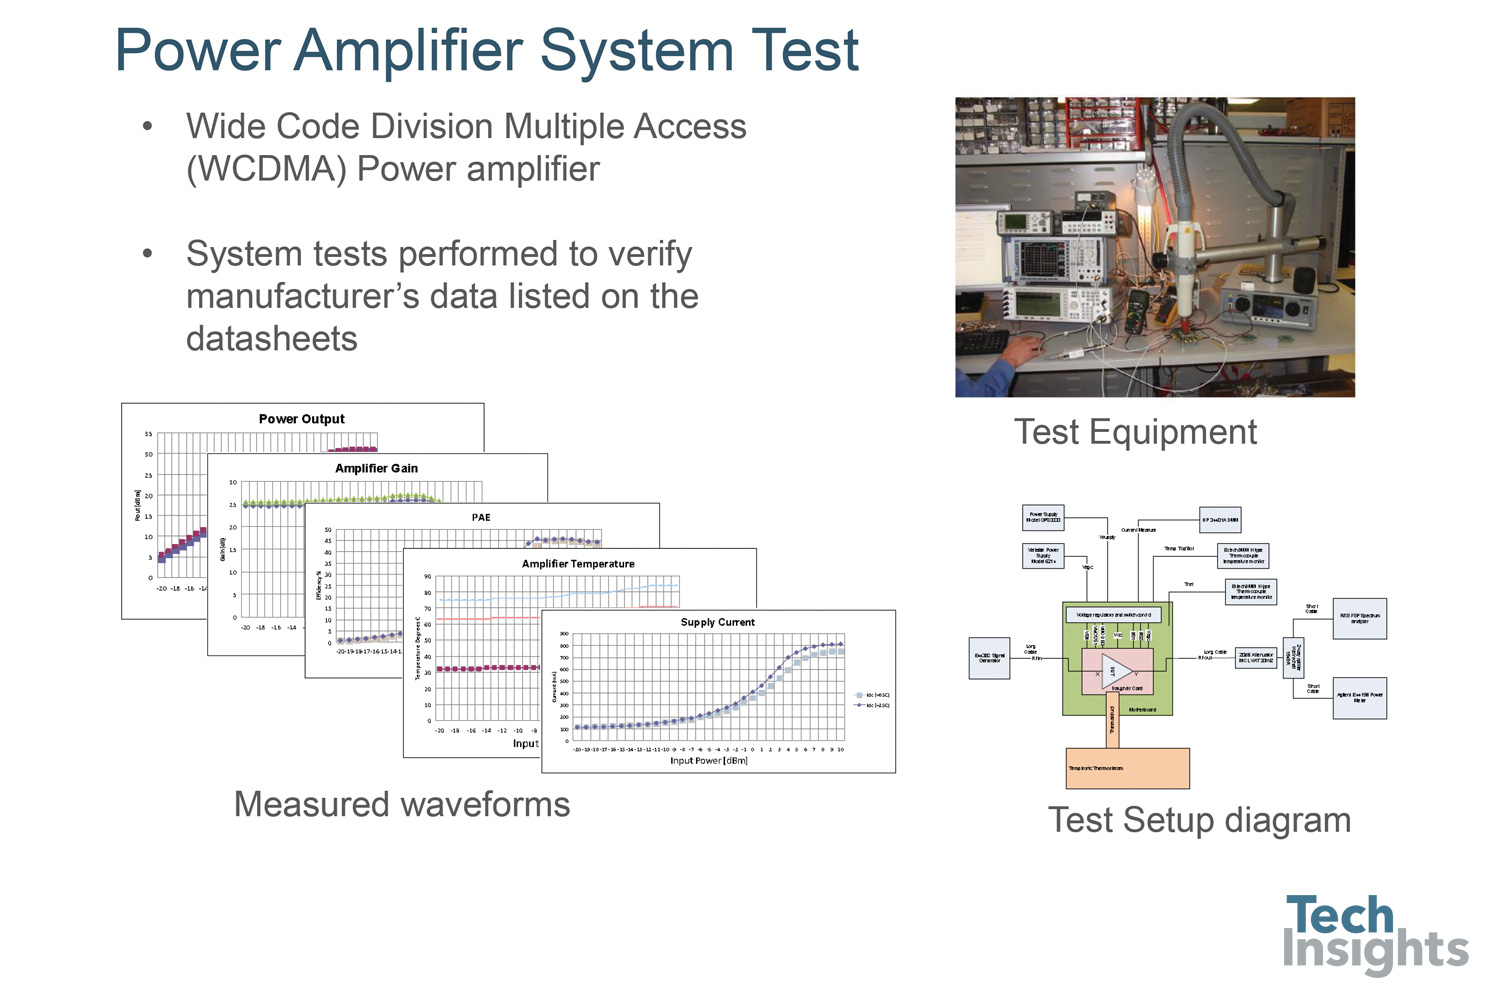 Power amplifier system testing. This analysis allows us to measure various operational parameters of a power amplifier